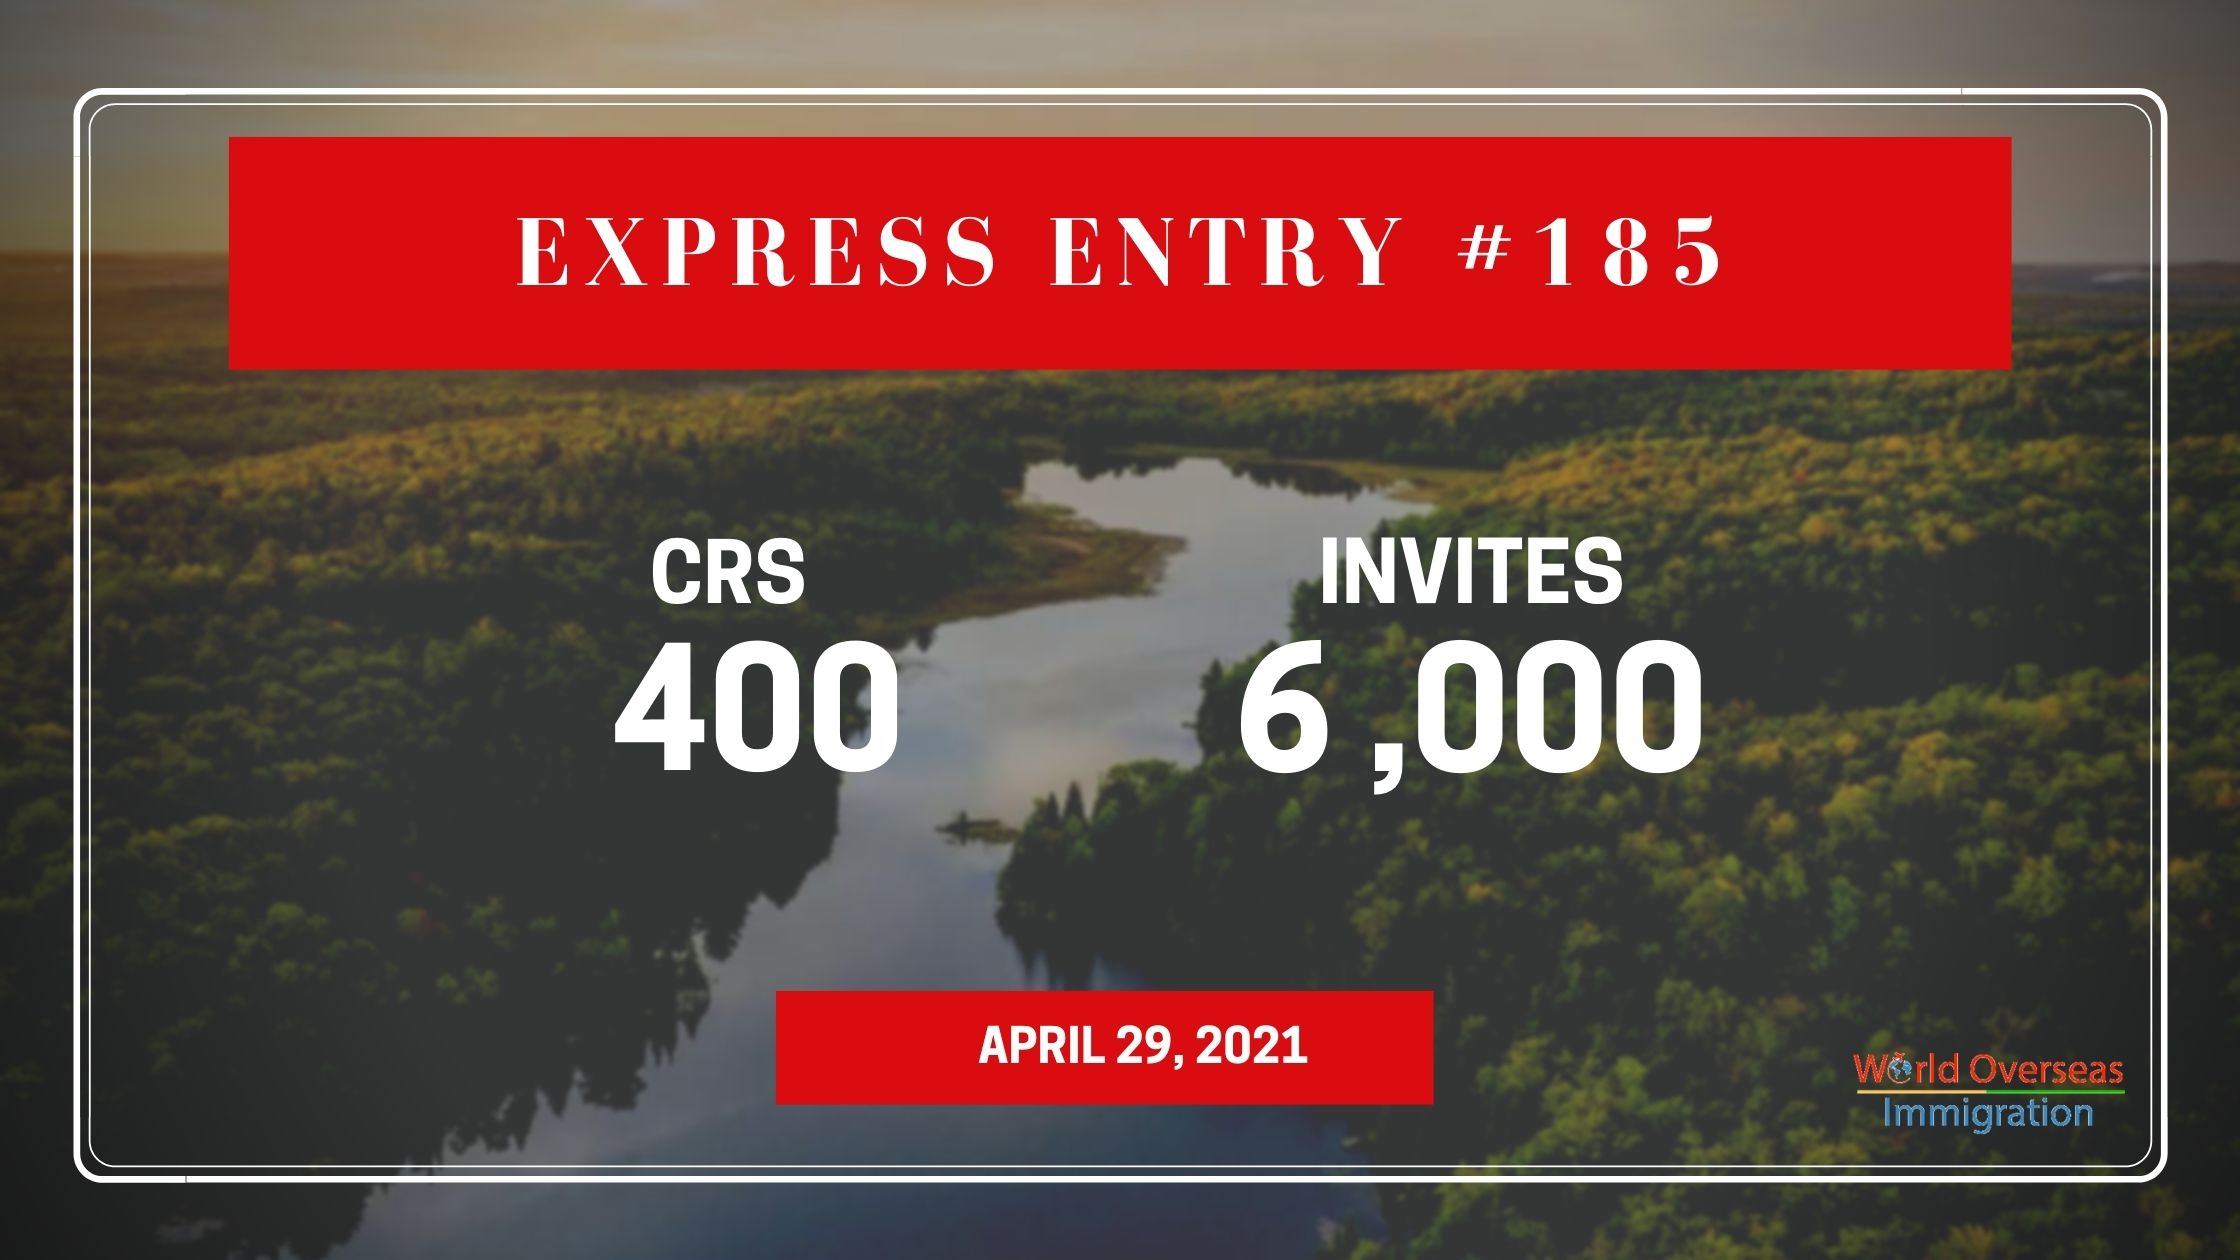 Express Entry #185: 6,000 ITAs are issued to the CEC Candidates